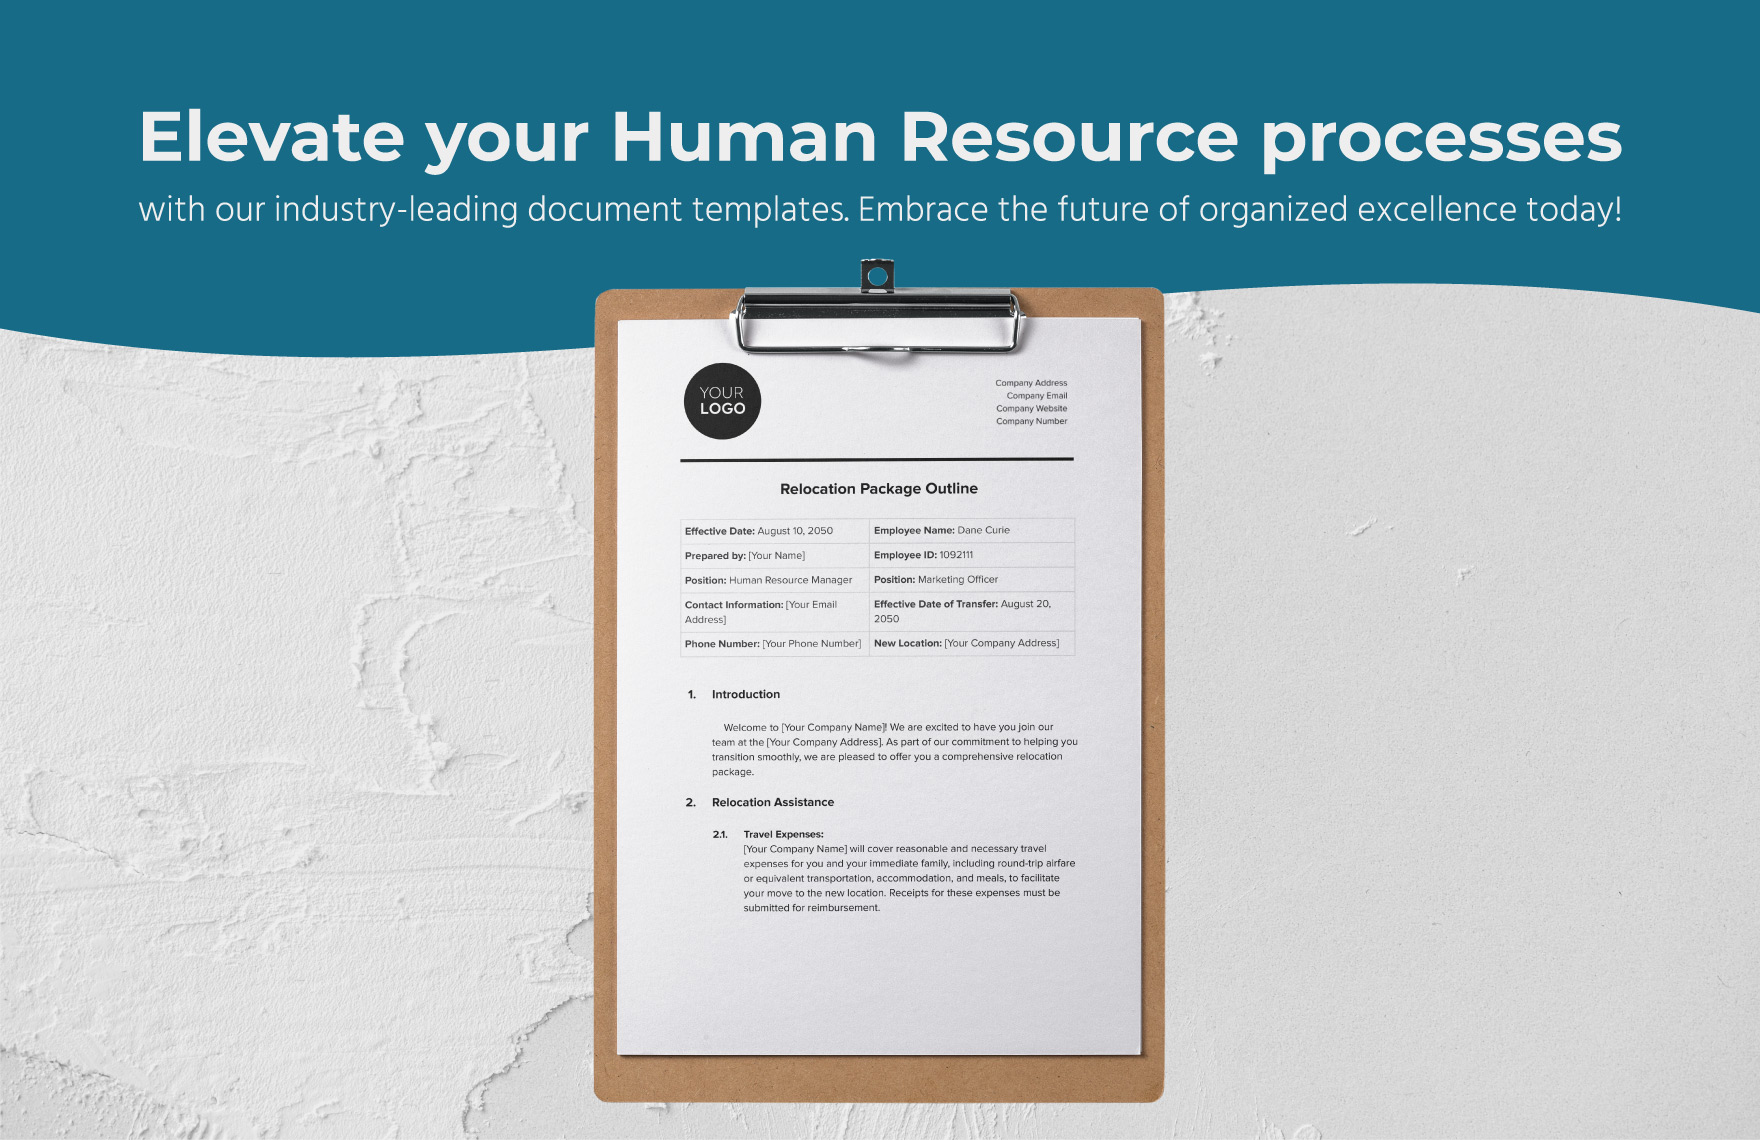 Relocation Package Outline HR Template